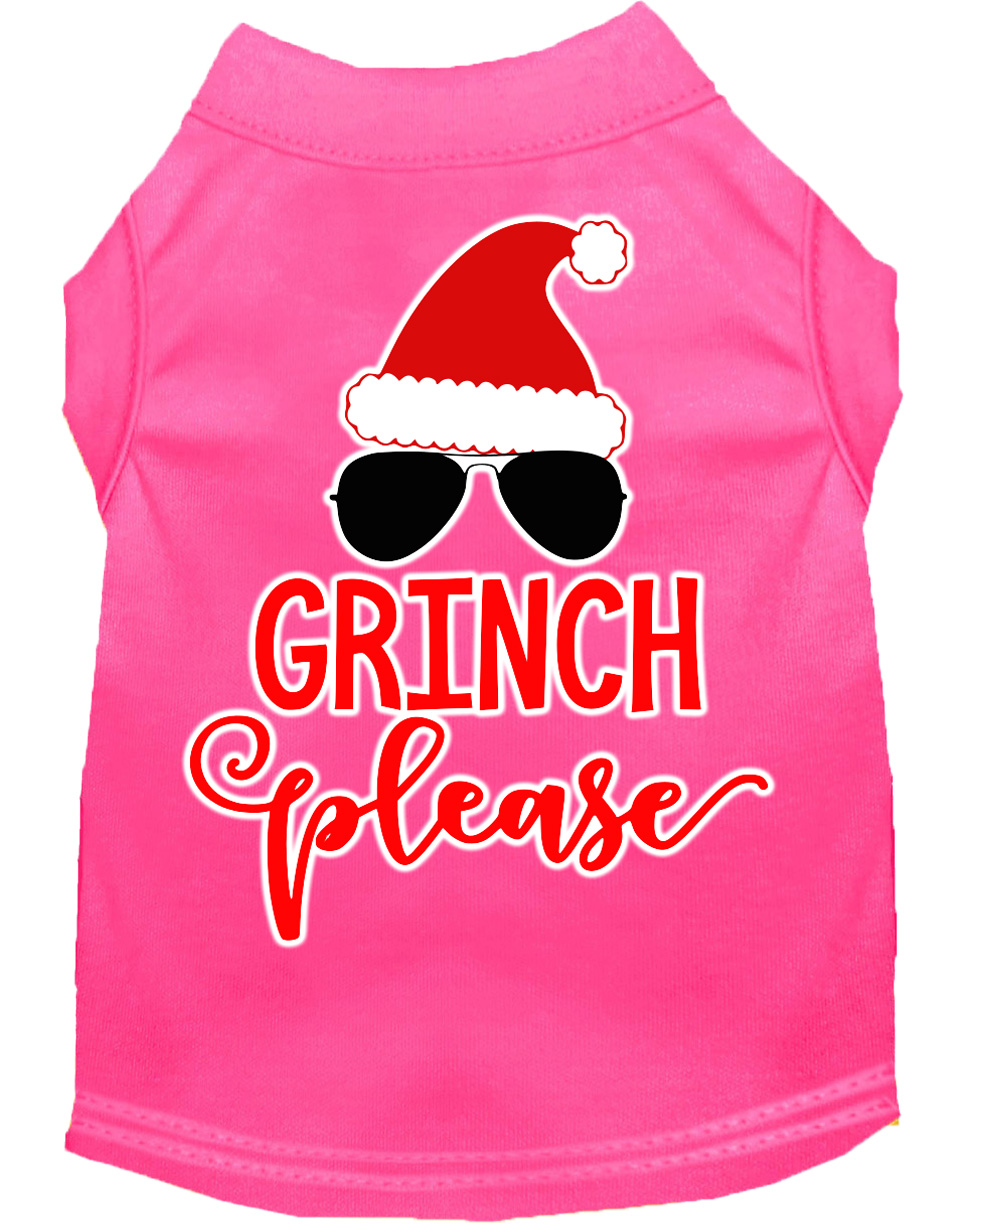 Grinch Please Screen Print Dog Shirt Bright Pink Med